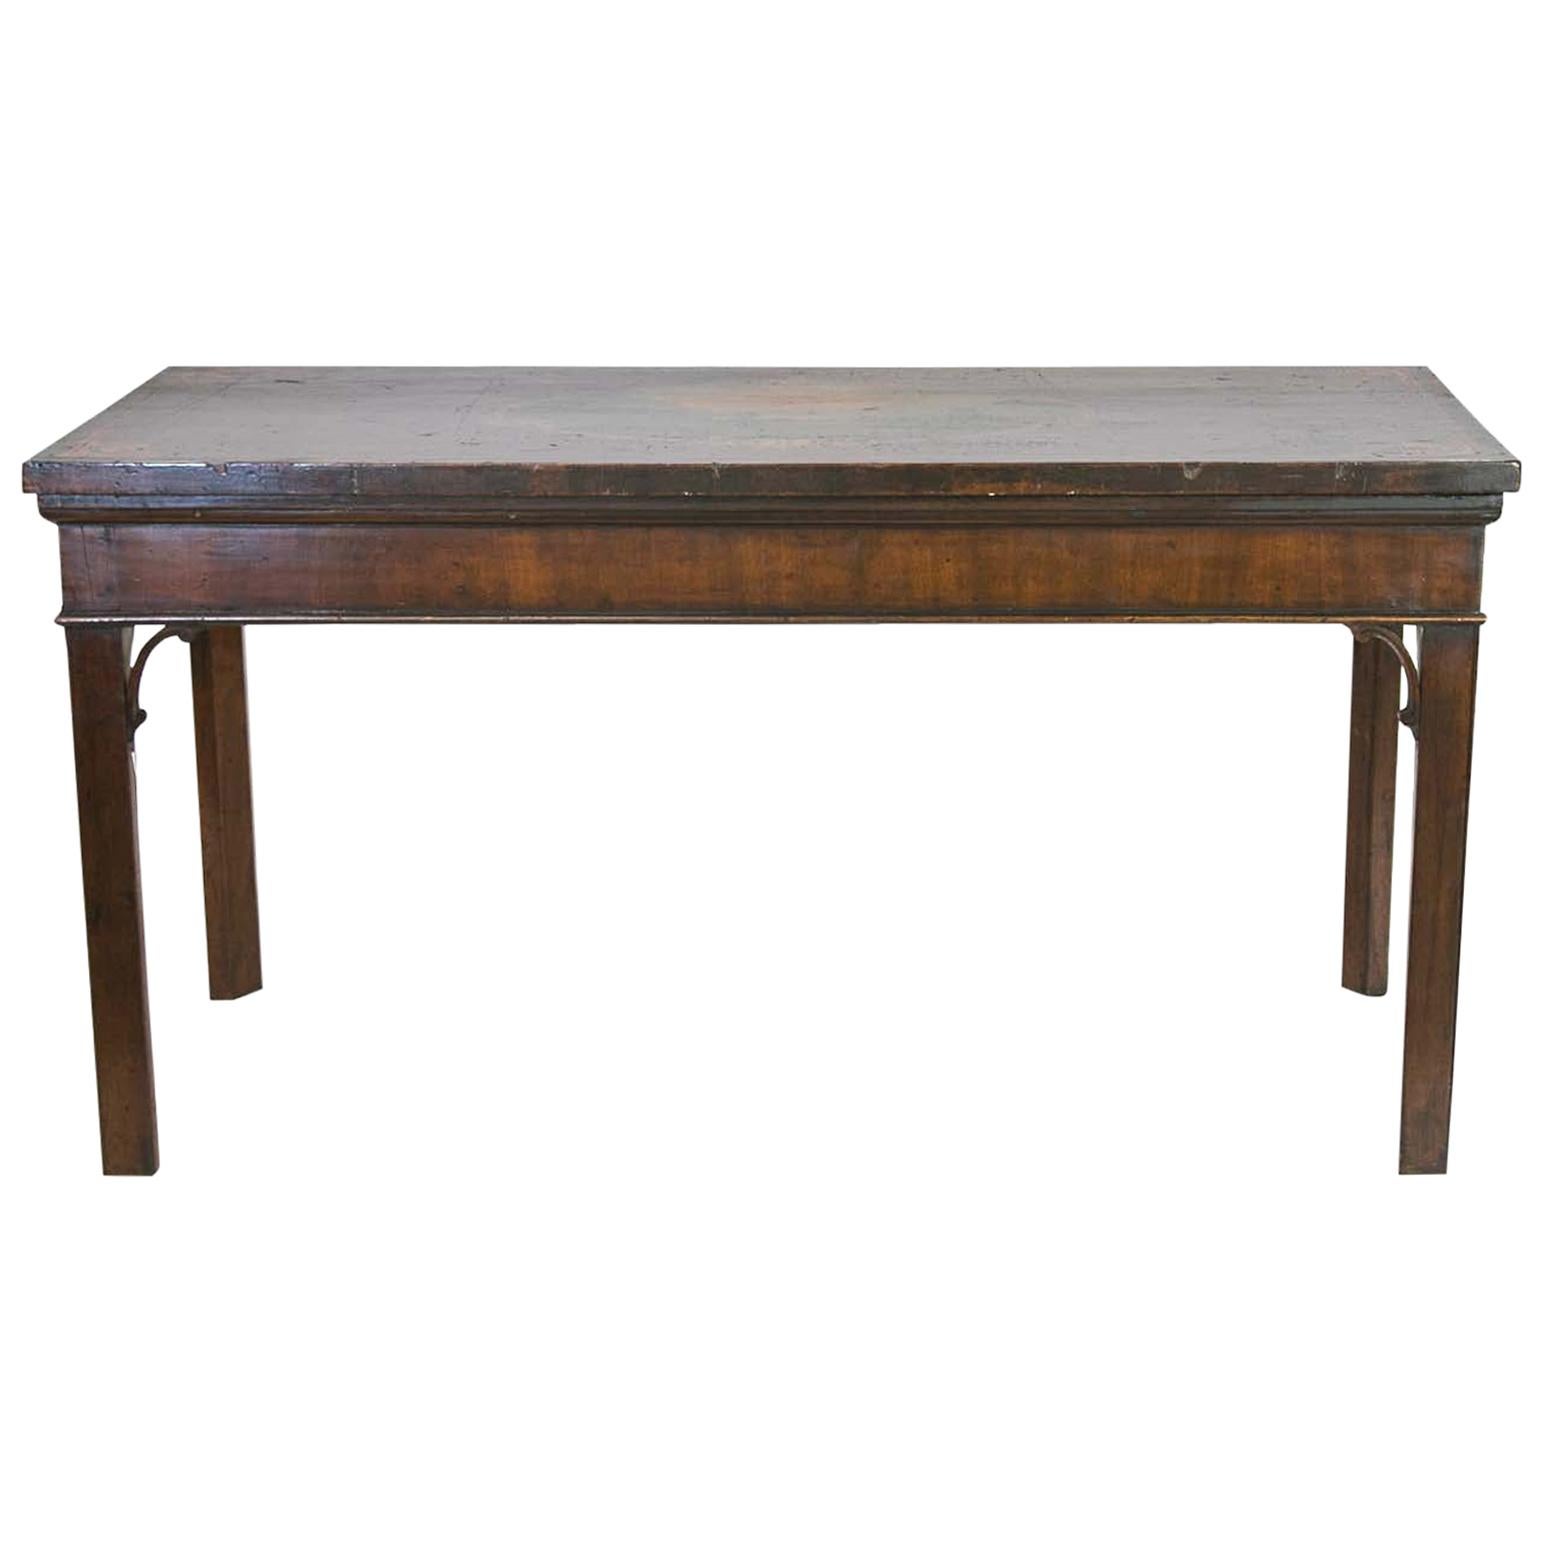 English Chippendale mahogany console table, this late 18th century table is painted with a scene from Glen Eagles Golf Club, depicting Lord Montague as the club champion in 1870, original finish.